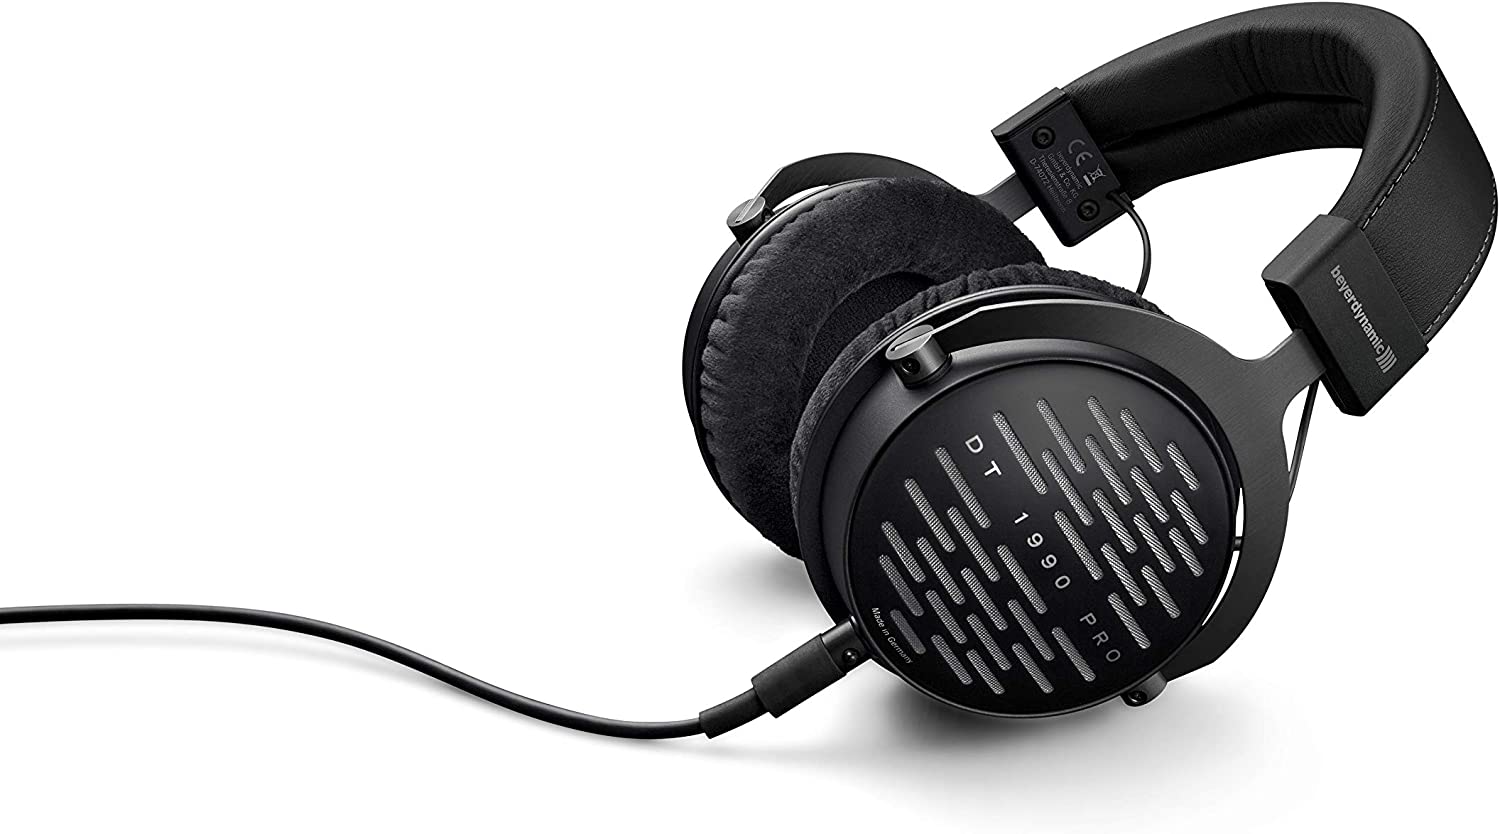 Beyerdynamic DT 1990 Pro Studio Headphones with Extra Cables and 3-Year Warranty Base Bundle